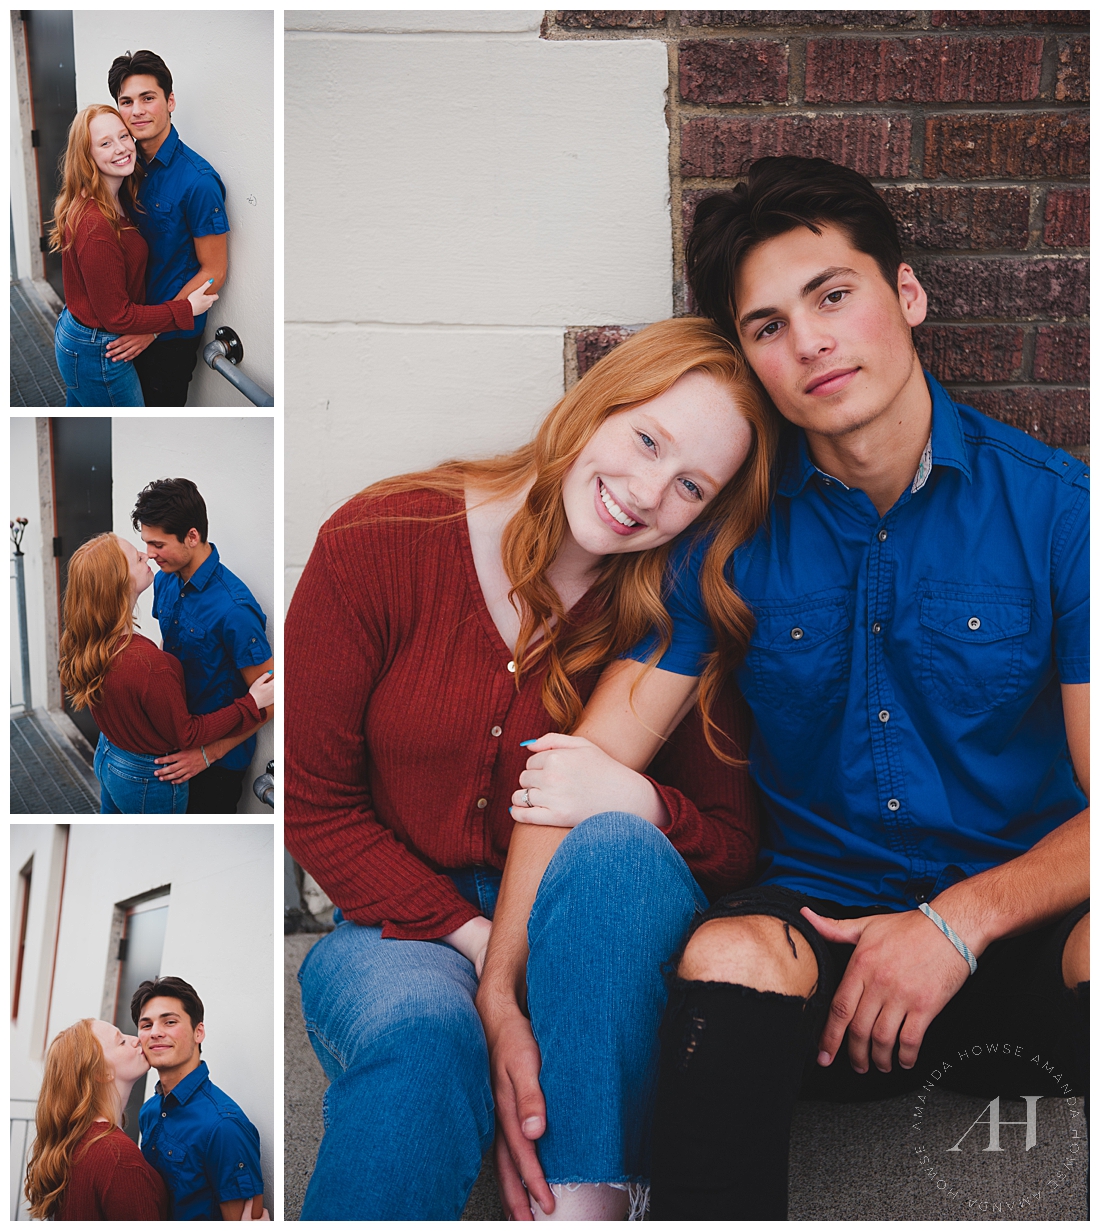 Bringing Your Significant Other to Senior Portraits | Boyfriend & Girlfriend Portraits Photographed by Tacoma Senior Photographer Amanda Howse